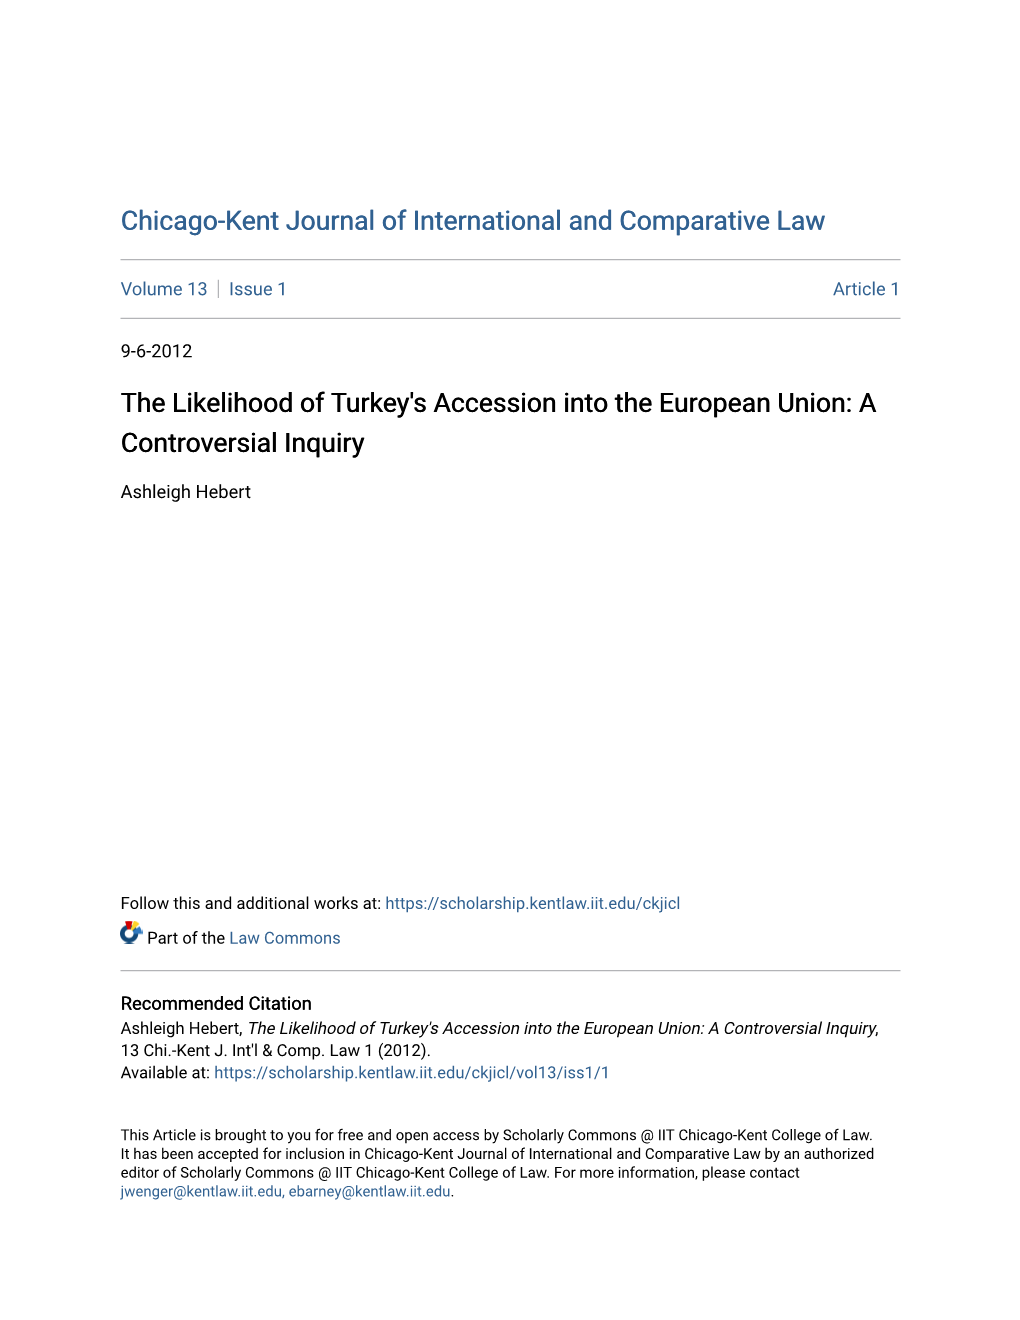 The Likelihood of Turkey's Accession Into the European Union: a Controversial Inquiry